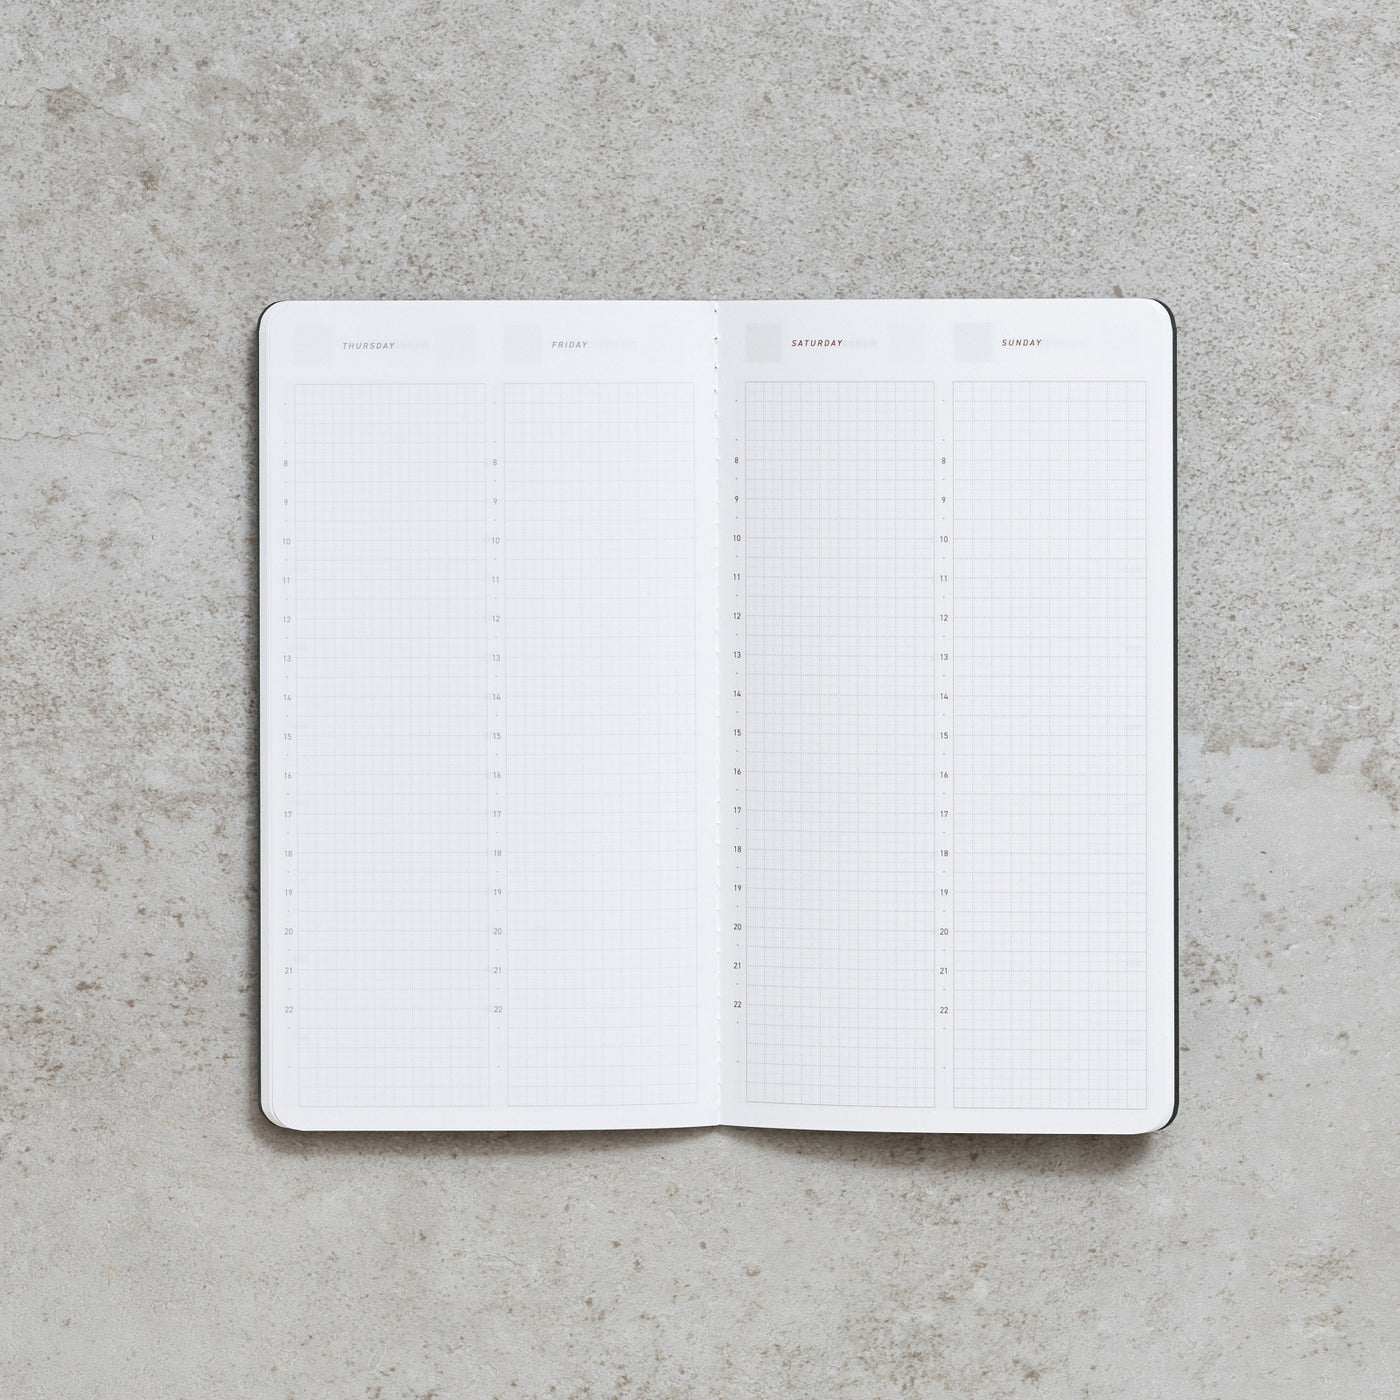 Take a Note "RECORD" - LITE Undated Hybrid Daily Planner